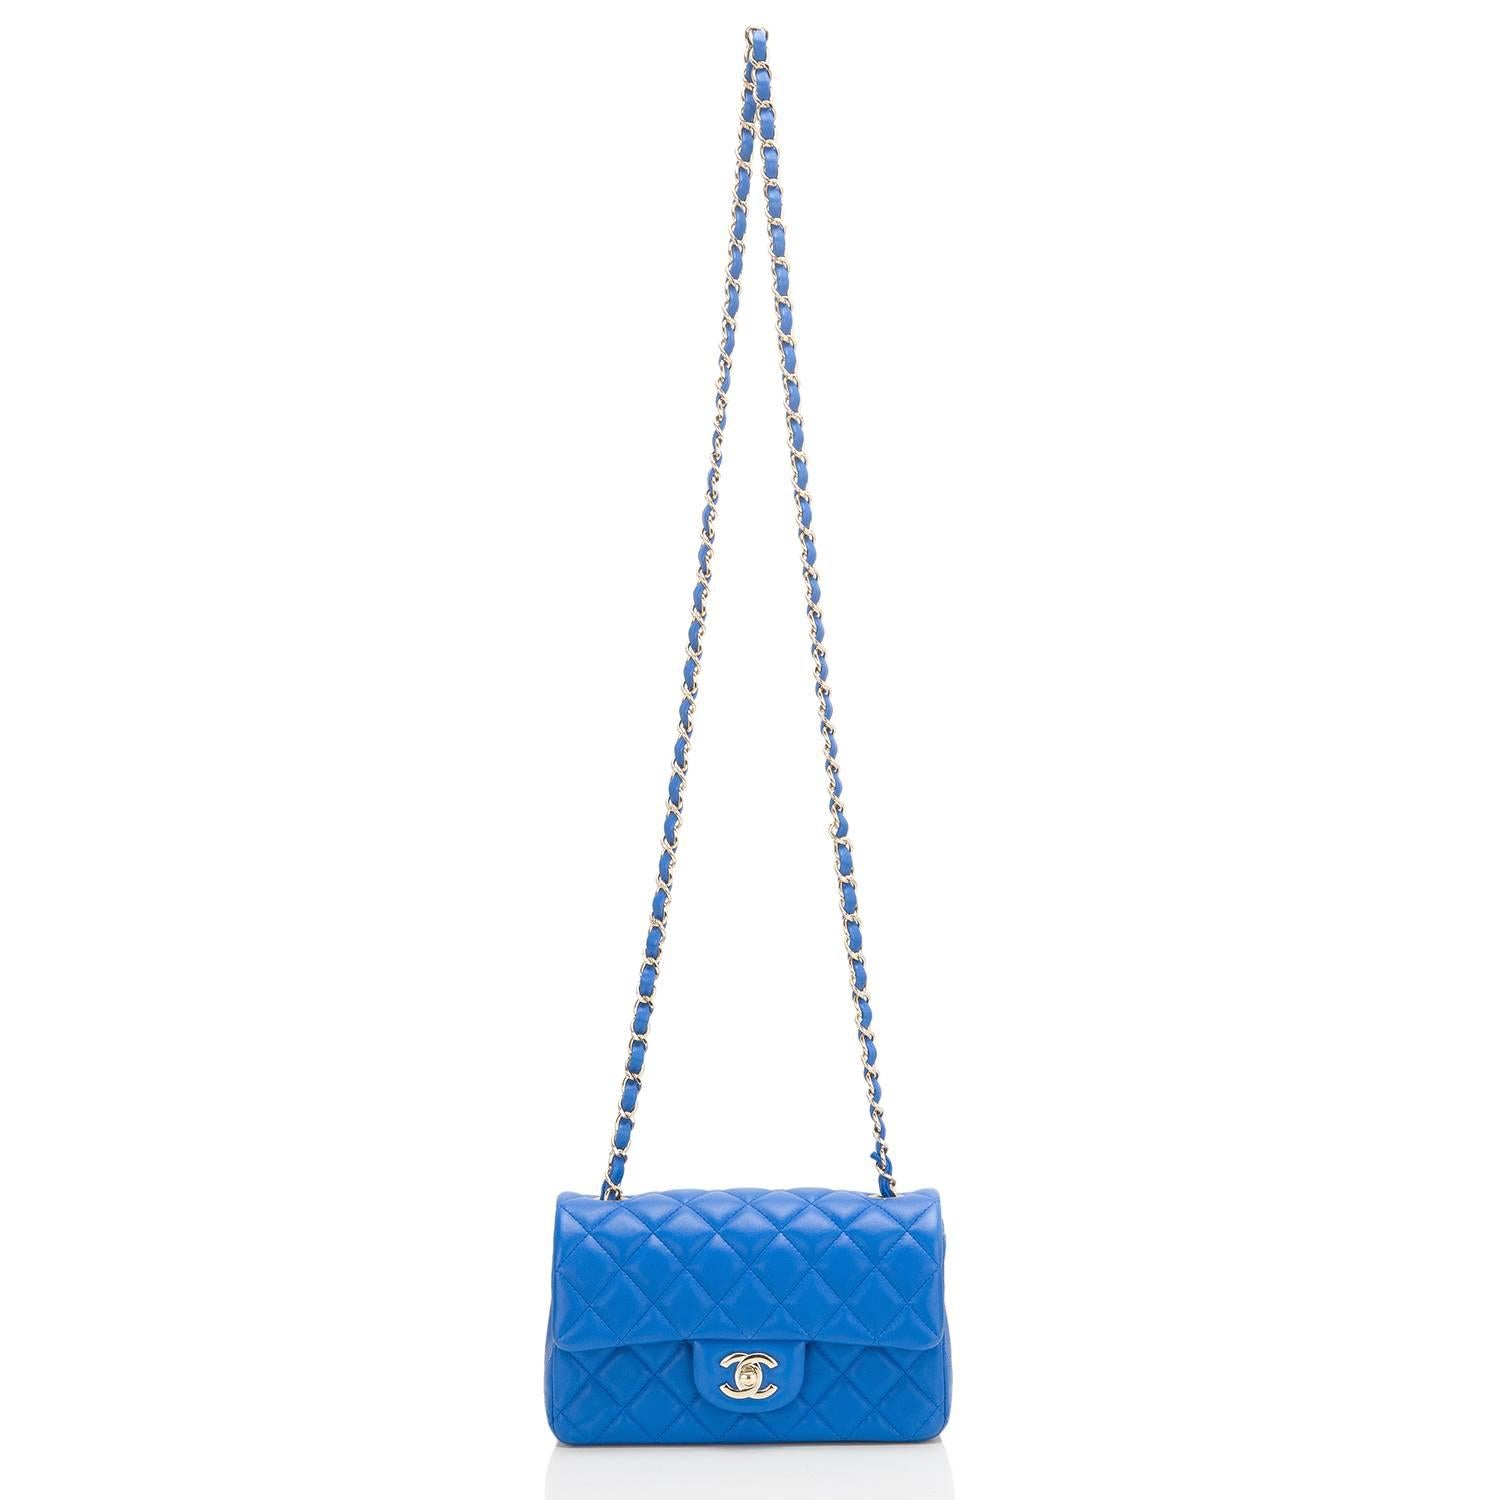 Chanel Blue Quilted Lambskin Rectangular Mini Classic Flap Bag For Sale 2